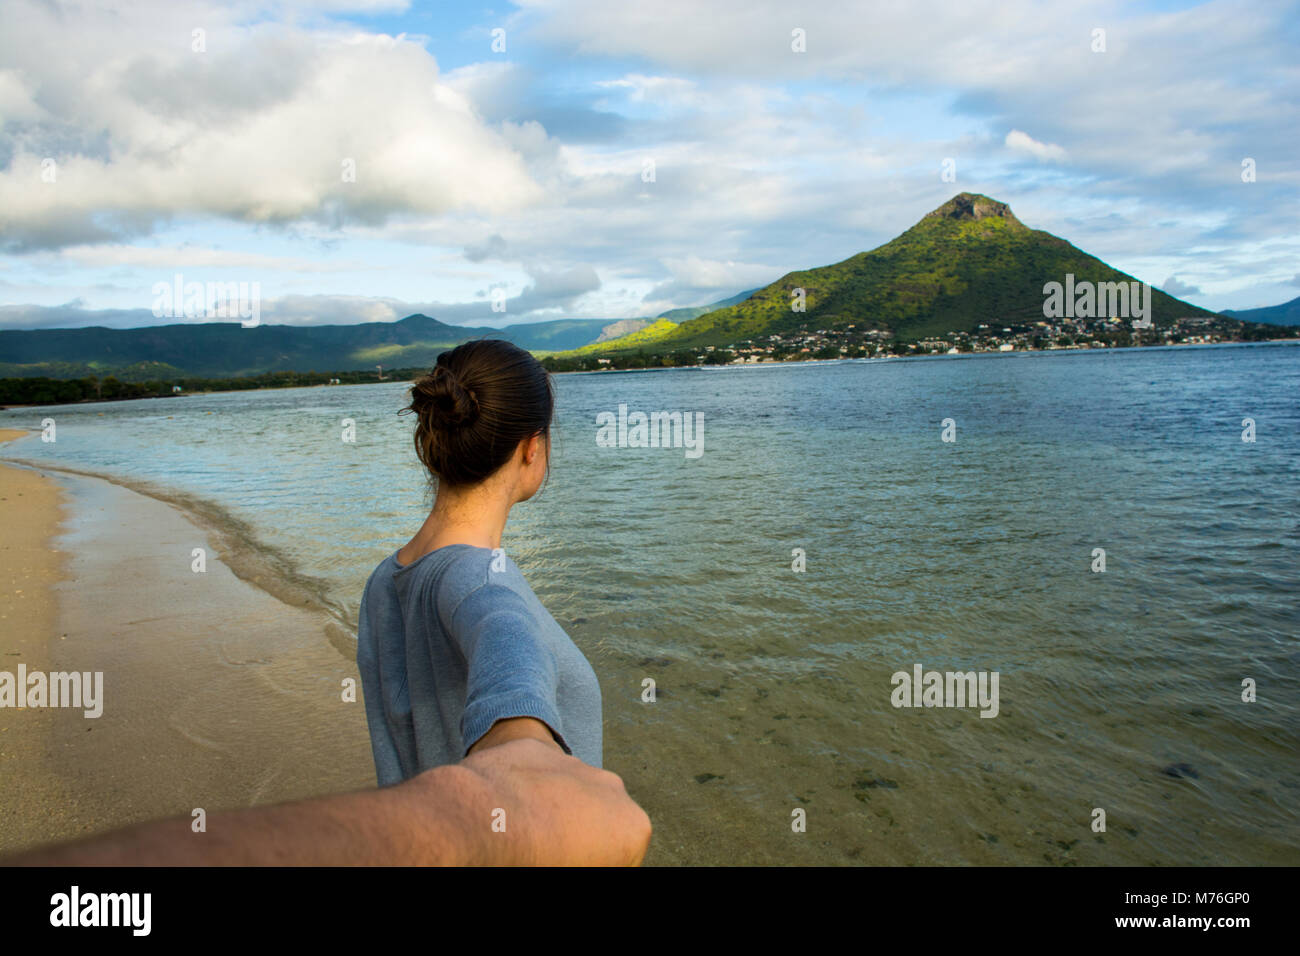 This young woman is leading the way for her partner, walking towards the ocean with the mountains in the background. Stock Photo